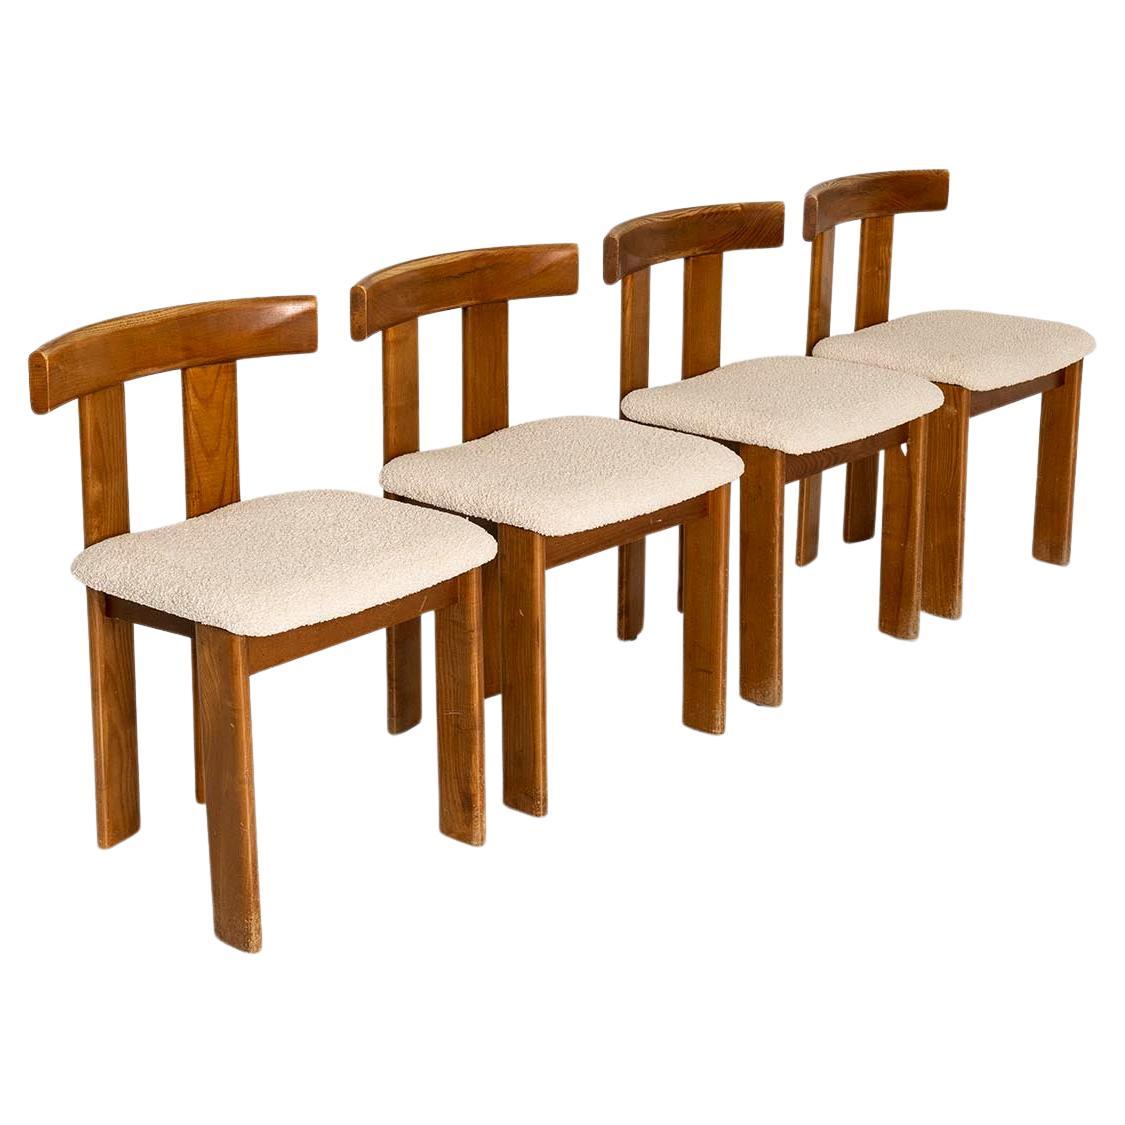 Beautiful set of four dining chairs by Luigi Vaghi for Former from the 1960s. While working with the most pertinent businesses to produce furniture on a human scale, Luigi Vaghi gave special attention to each individual item even though he was